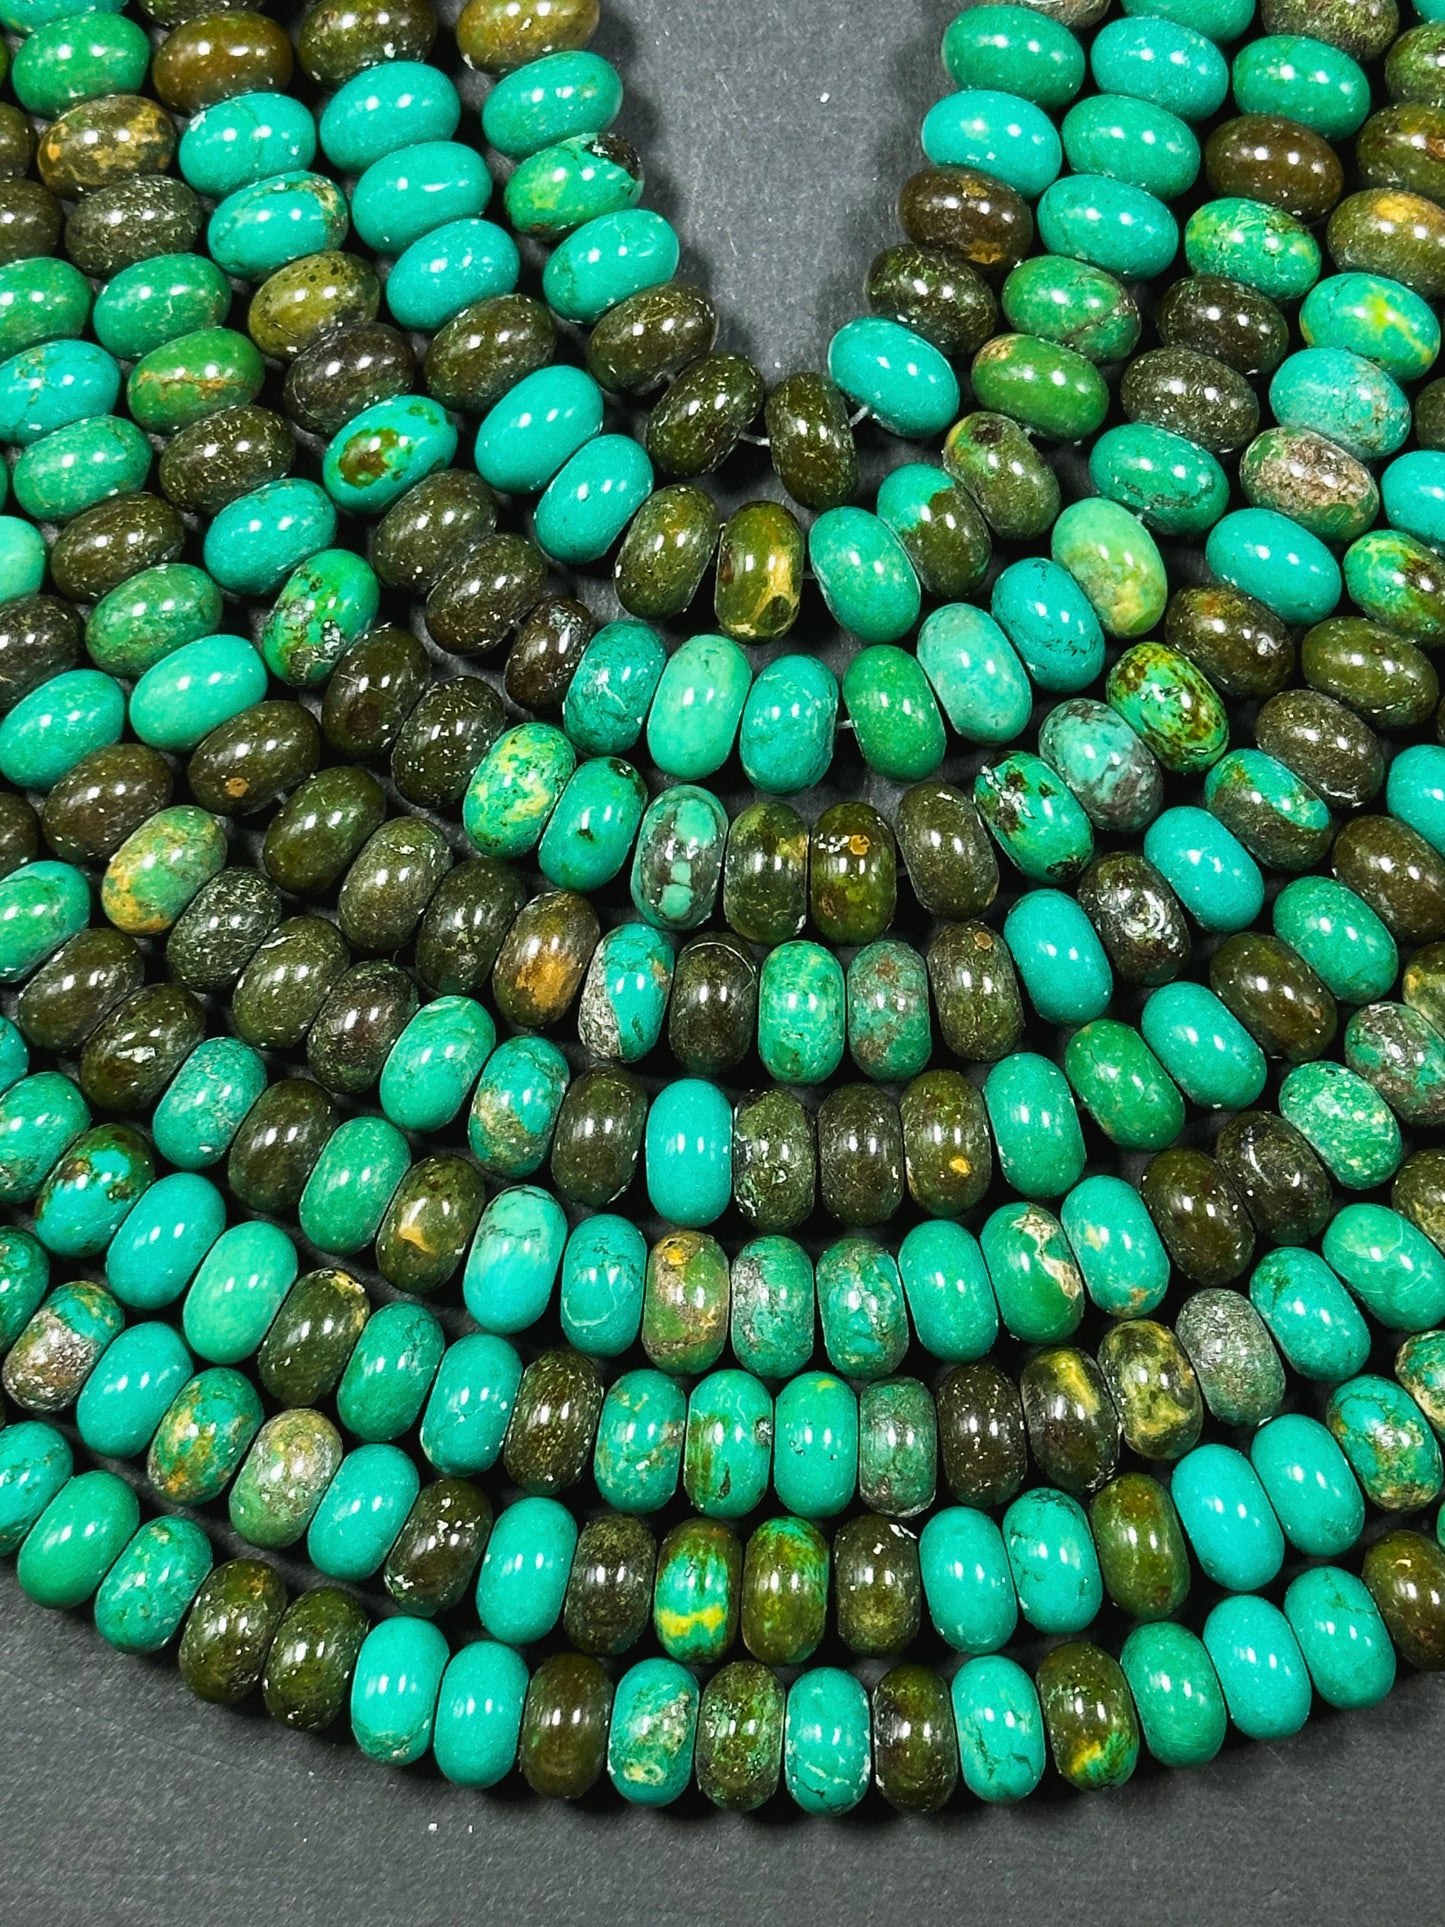 Natural Chinese Turquoise Gemstone Bead 10x6mm Rondelle Shape, Beautiful Green Blue Brown Color Turquoise Beads, Great Quality 15.5" Strand